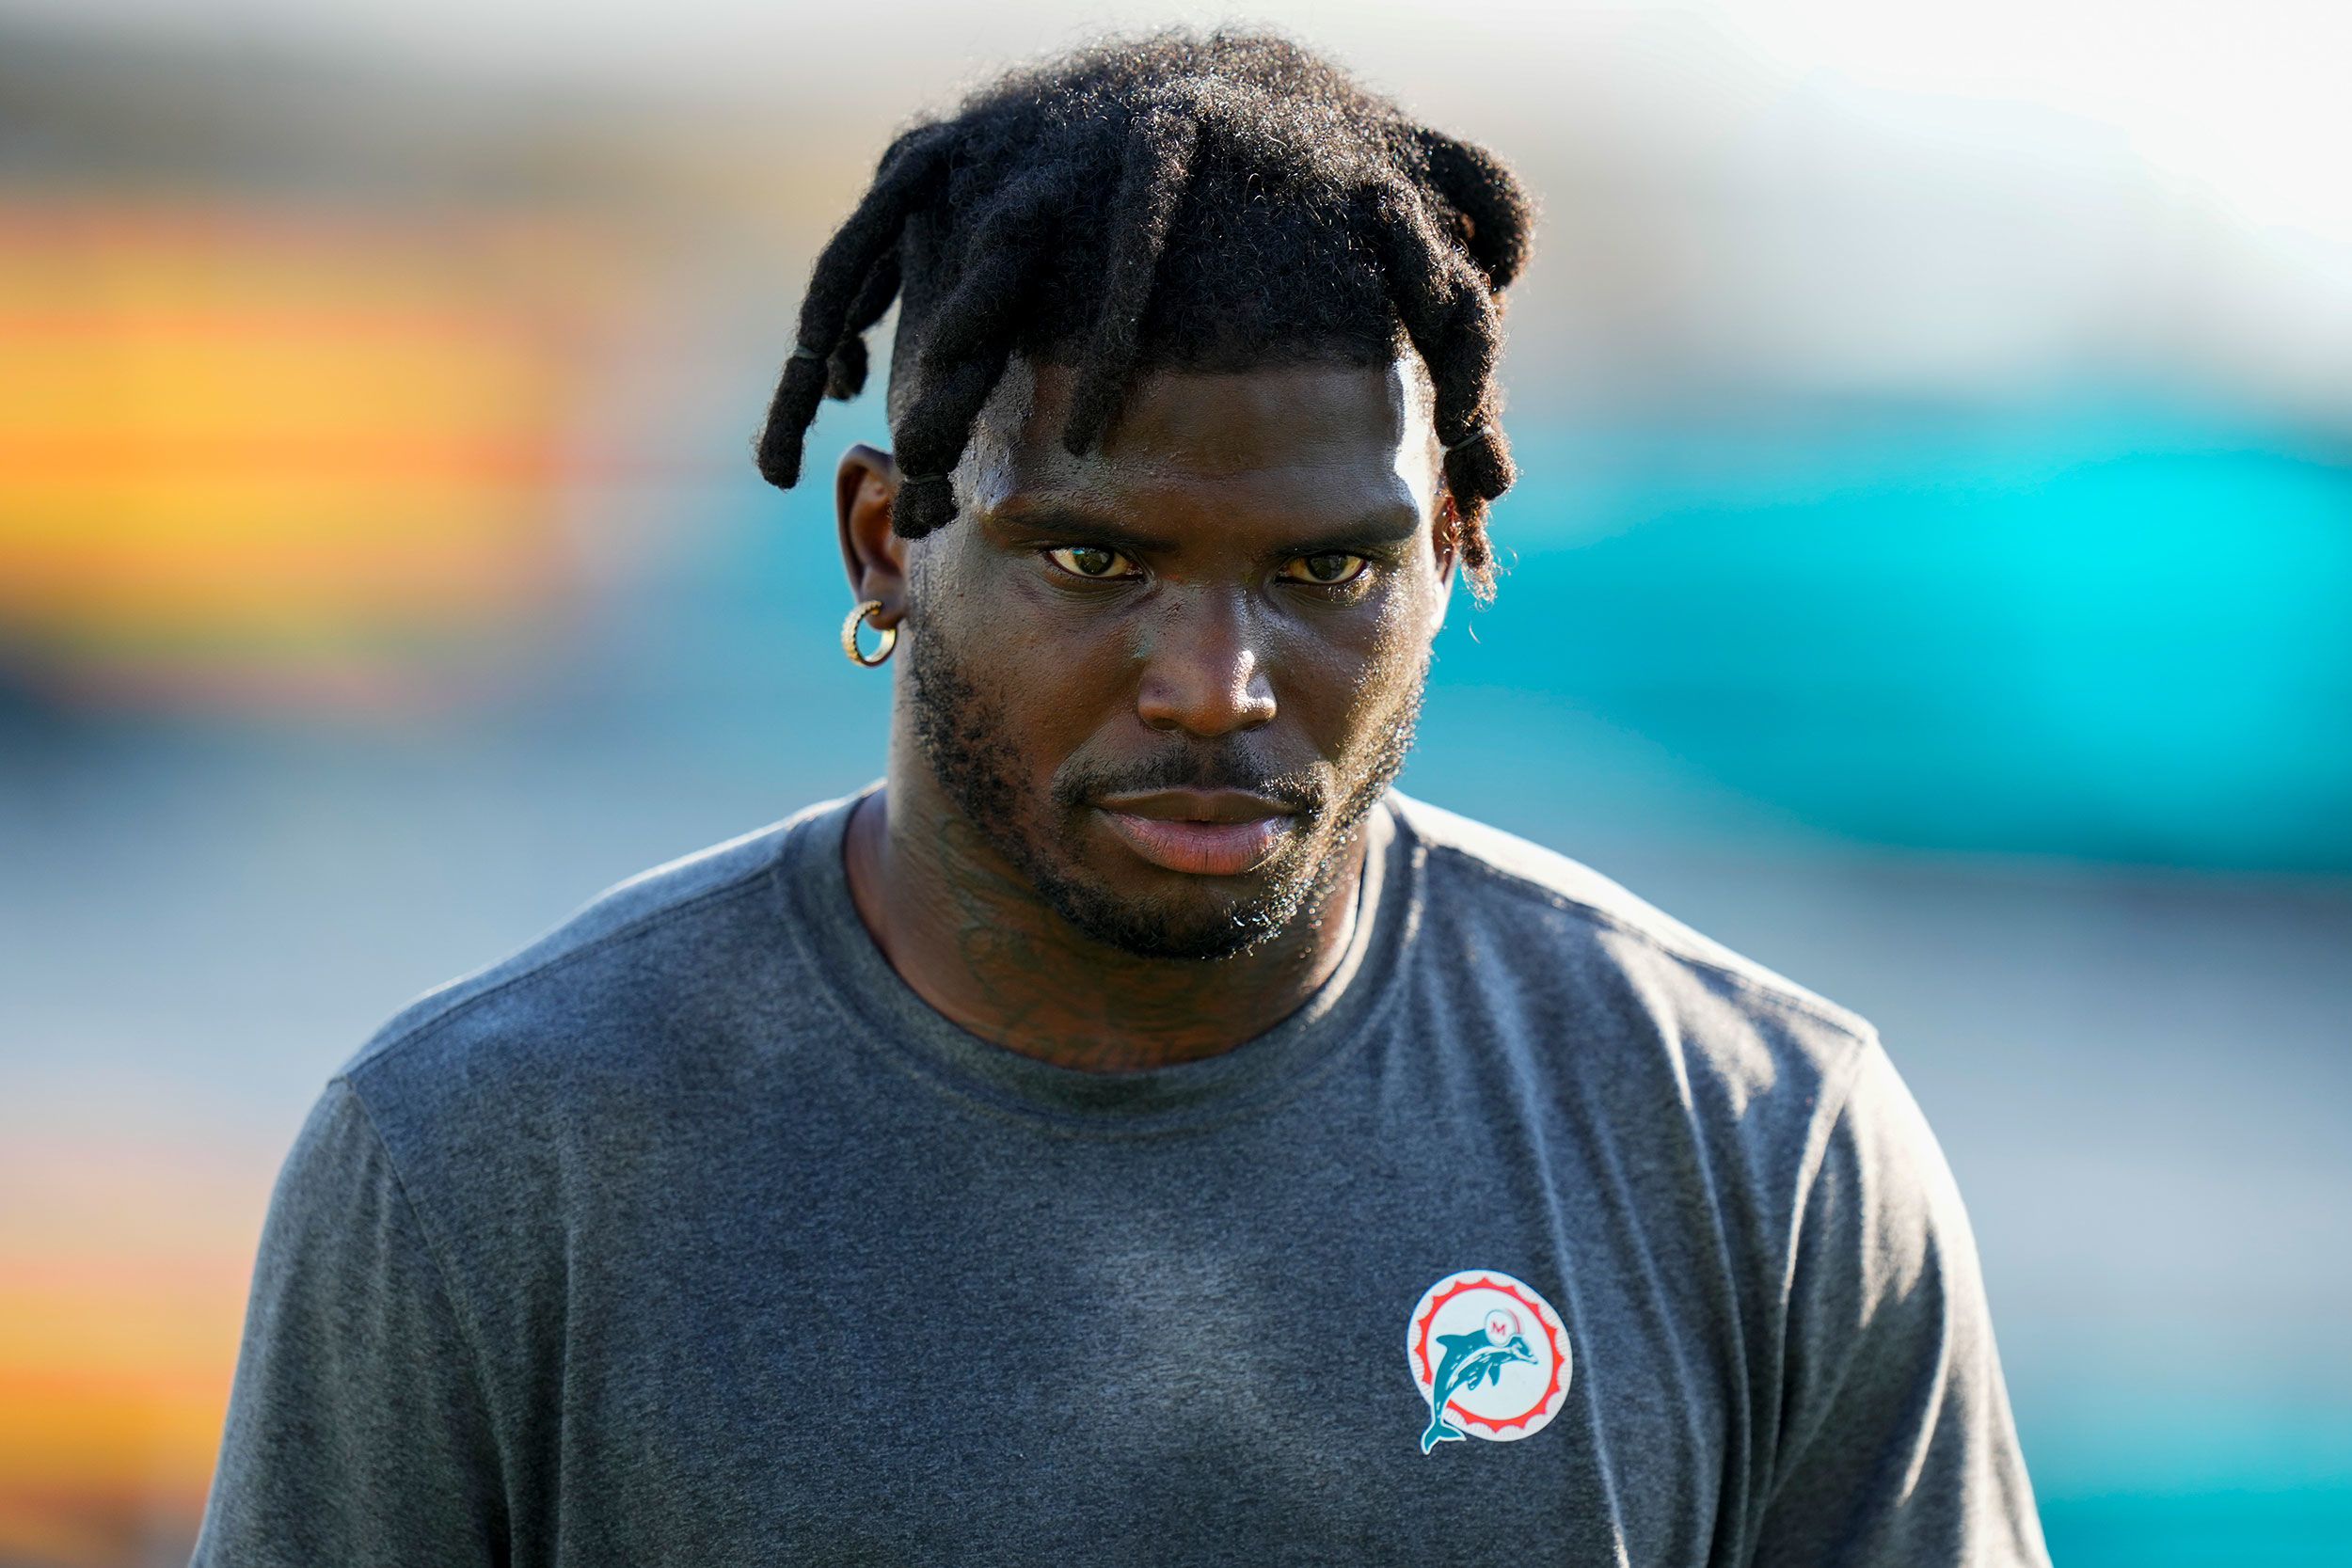 Child Playing with Lighter Sparks Fire at Home of Miami Dolphins Star ...